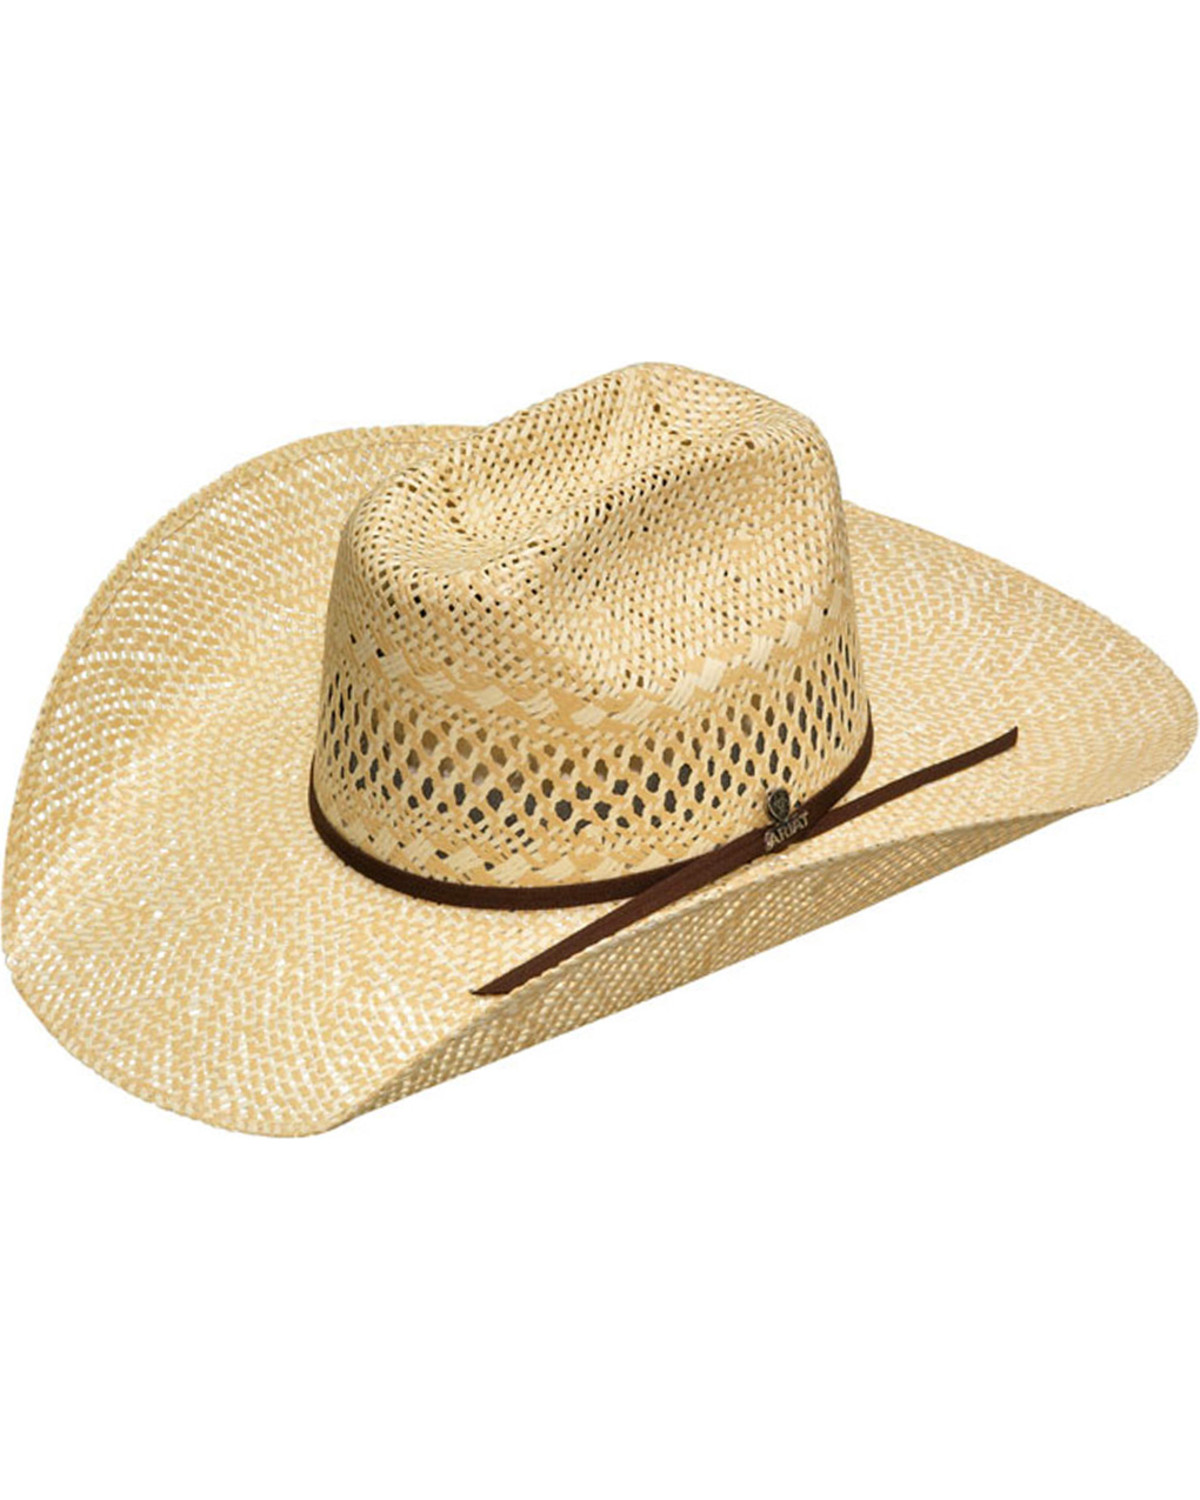 Ariat Twisted Weave Straw Cowboy Hat